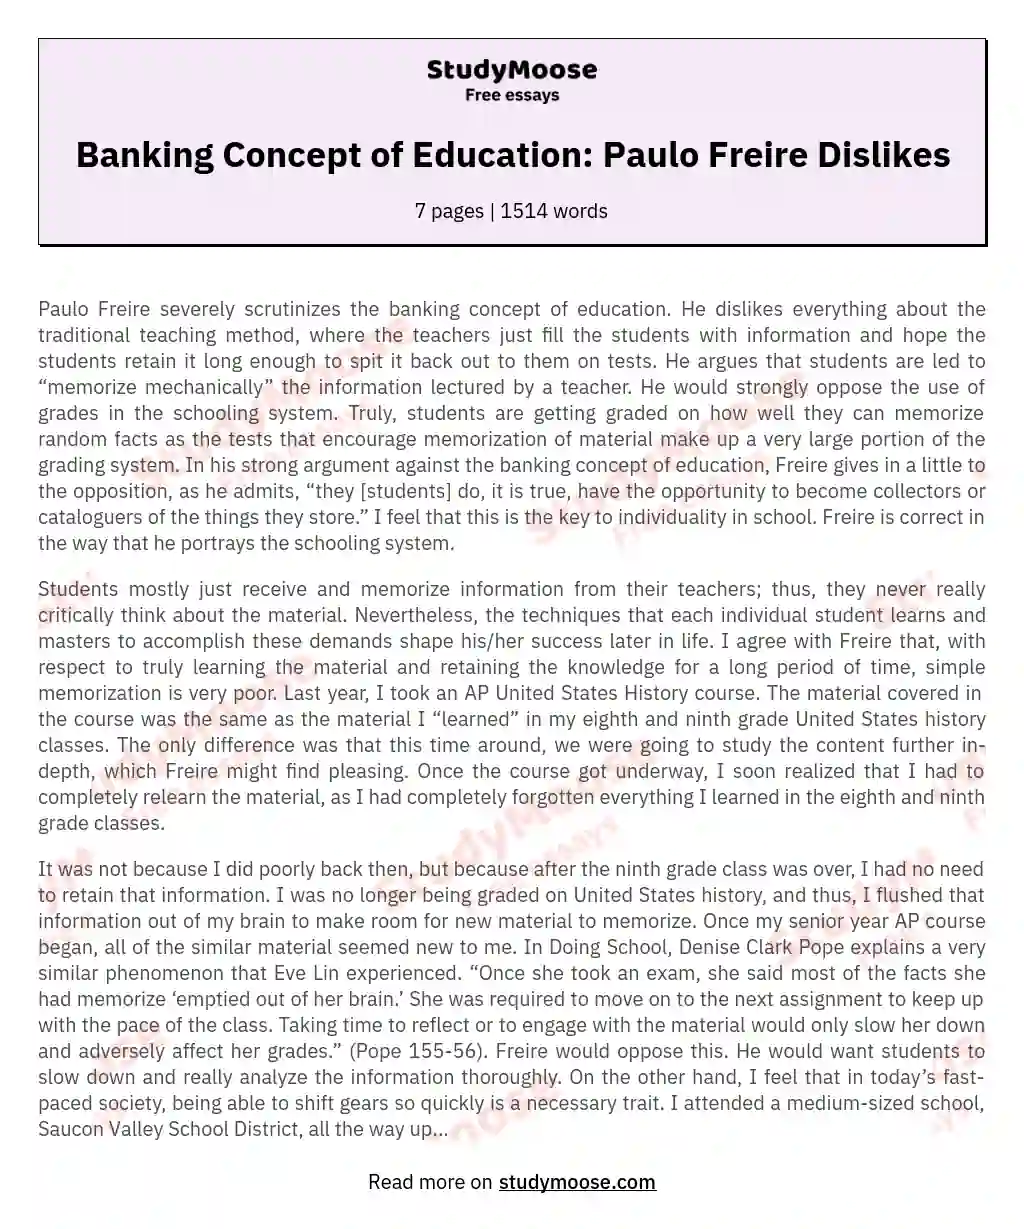 Banking Concept of Education: Paulo Freire Dislikes essay